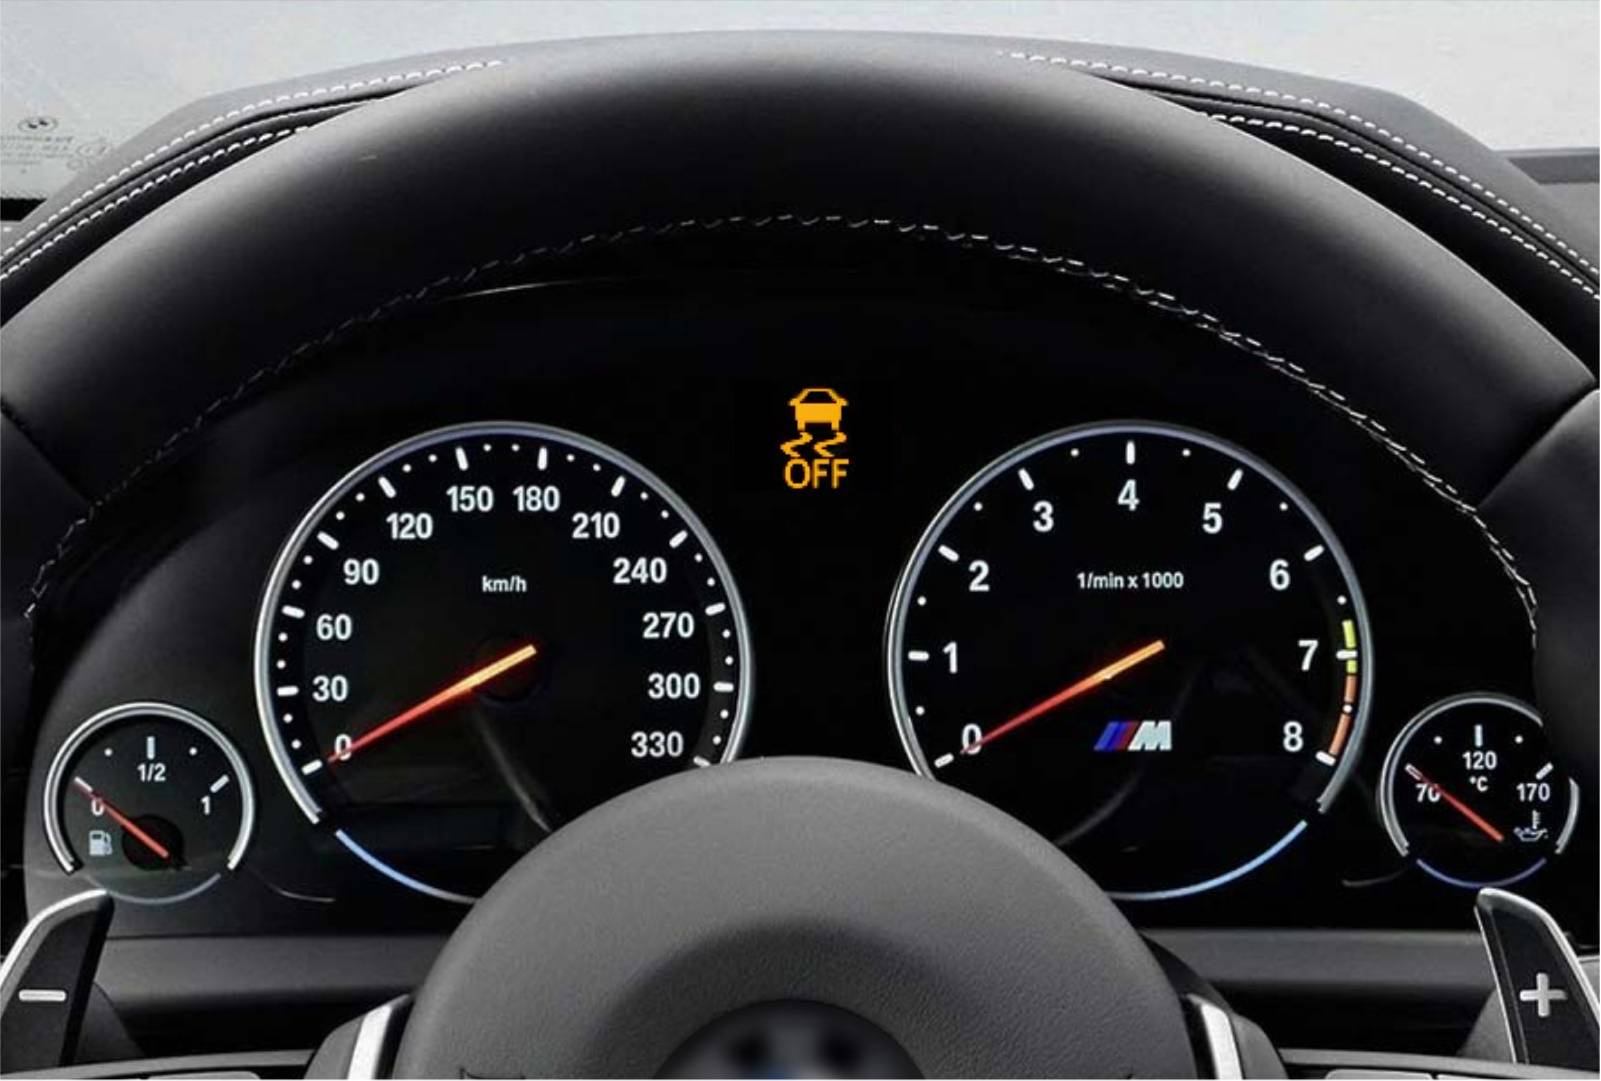 Dynamic Traction Control (DTC)